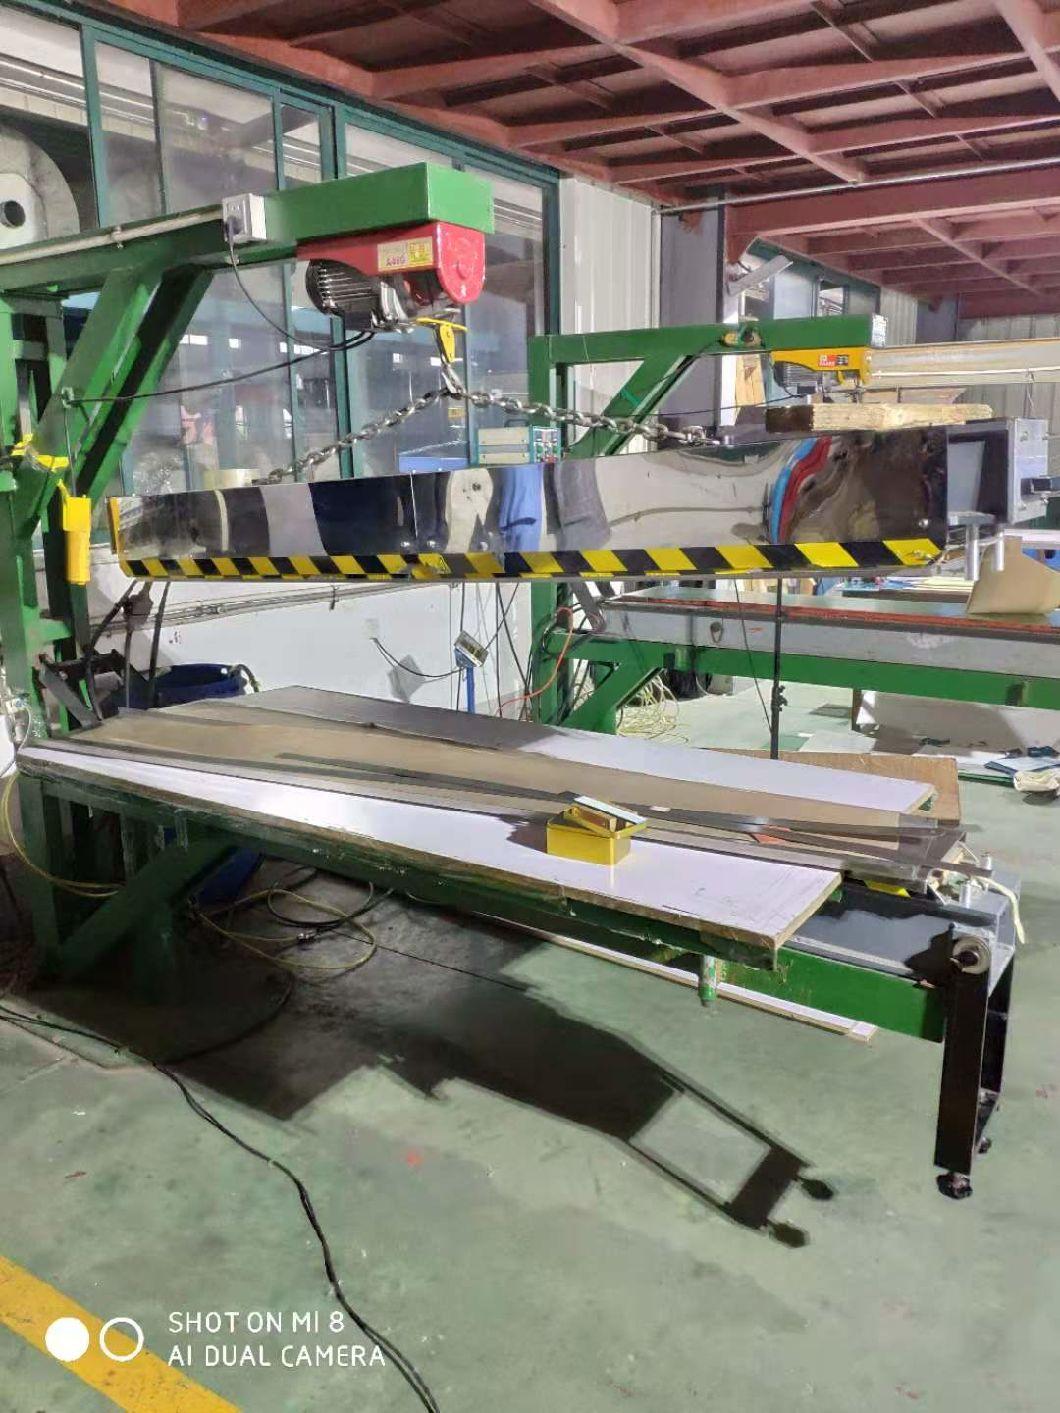 4.5mm sawtooth conveyor belt for agriculture and food industries